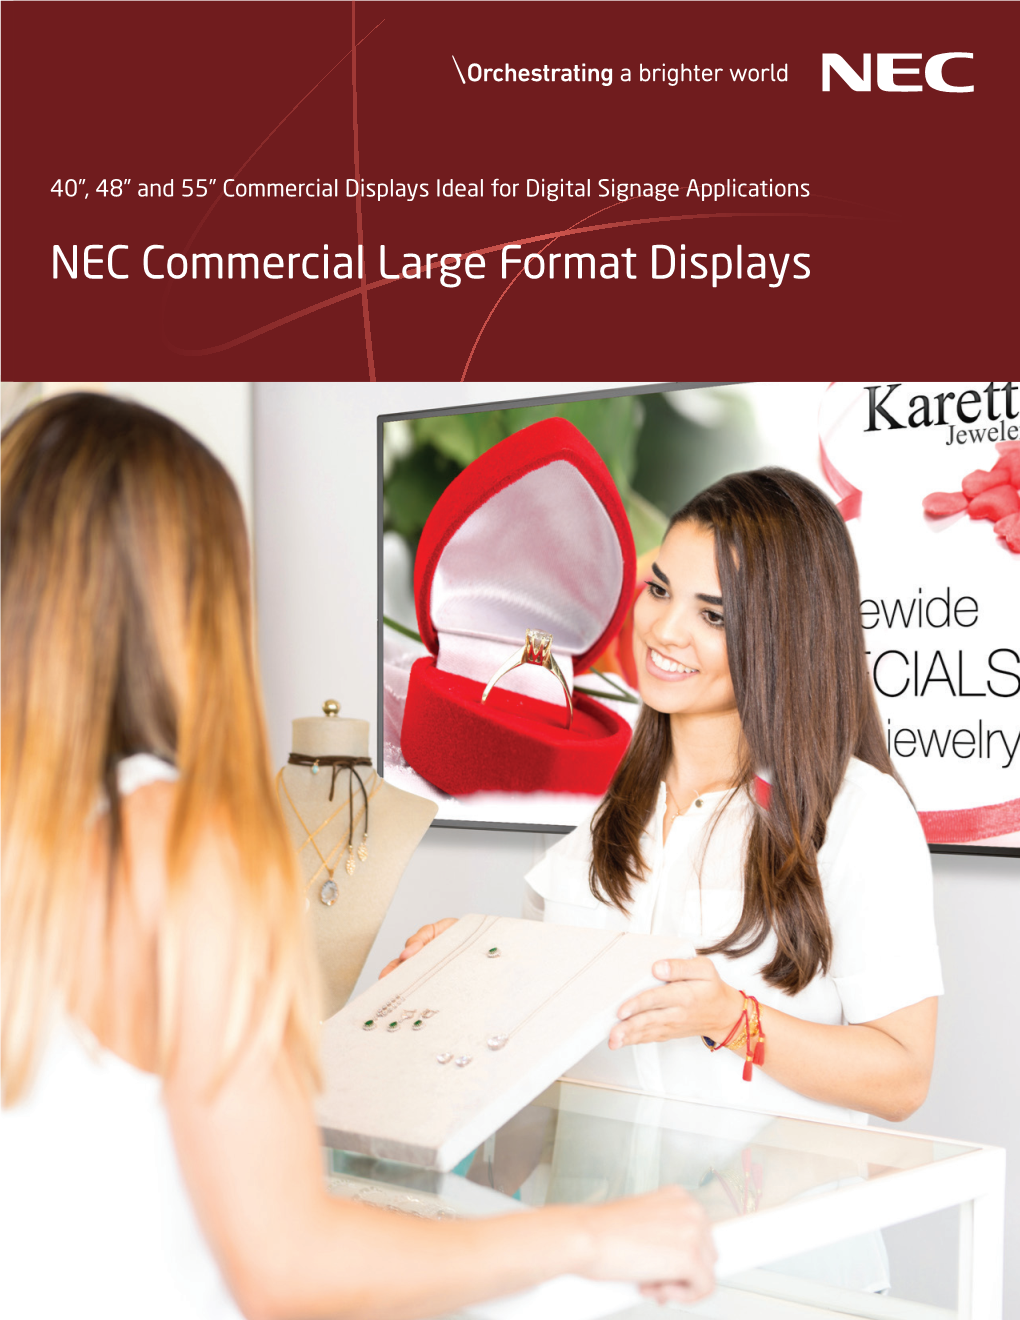 NEC Commercial Large Format Displays